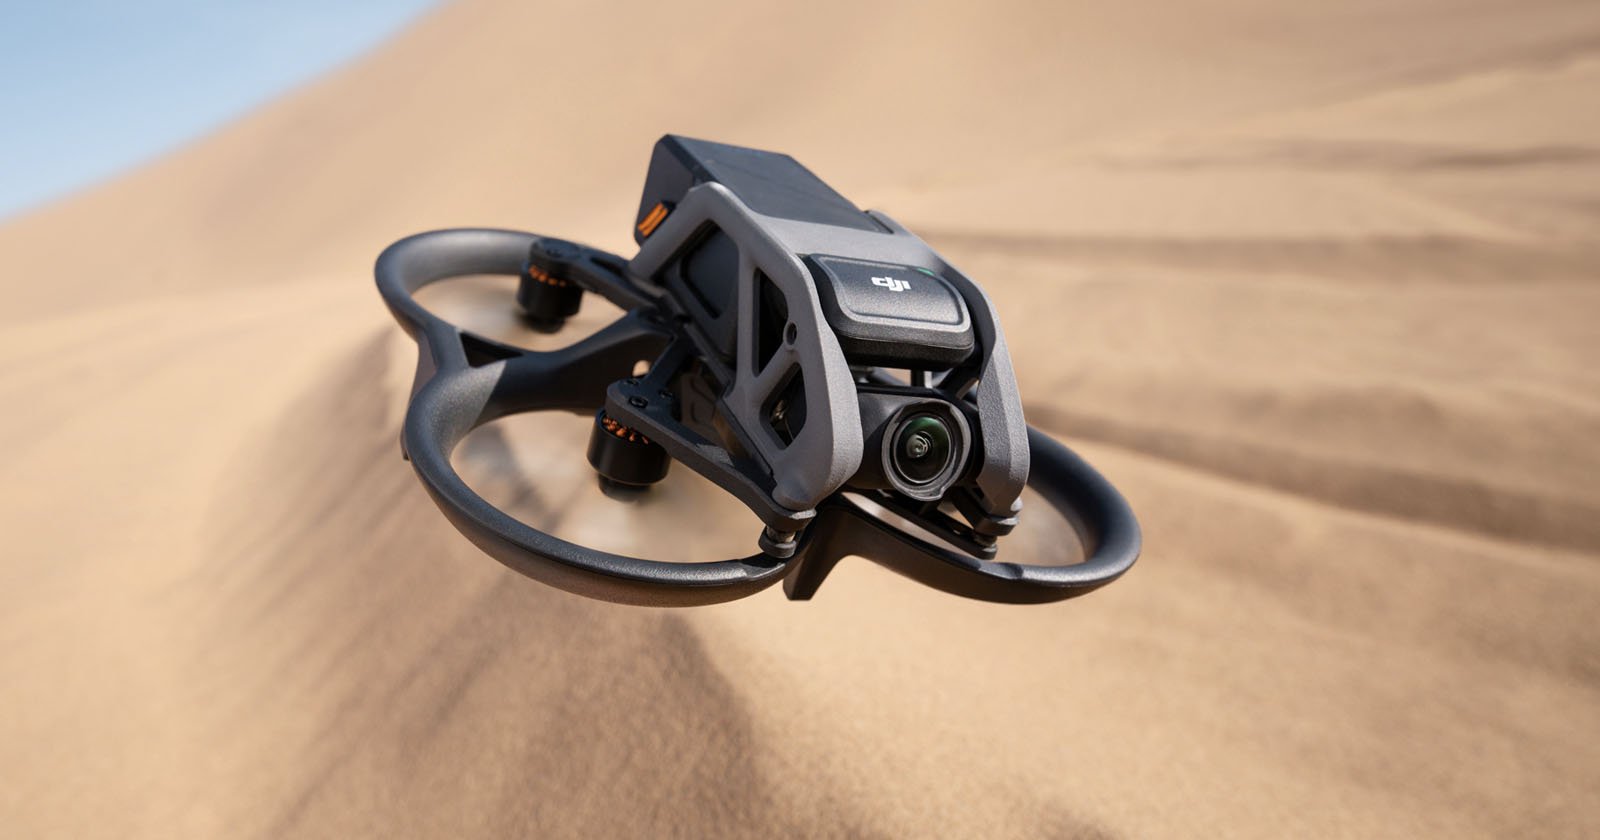 DJI Avata Review: A Durable, Easy-to-Fly, Entry-Level FPV Drone